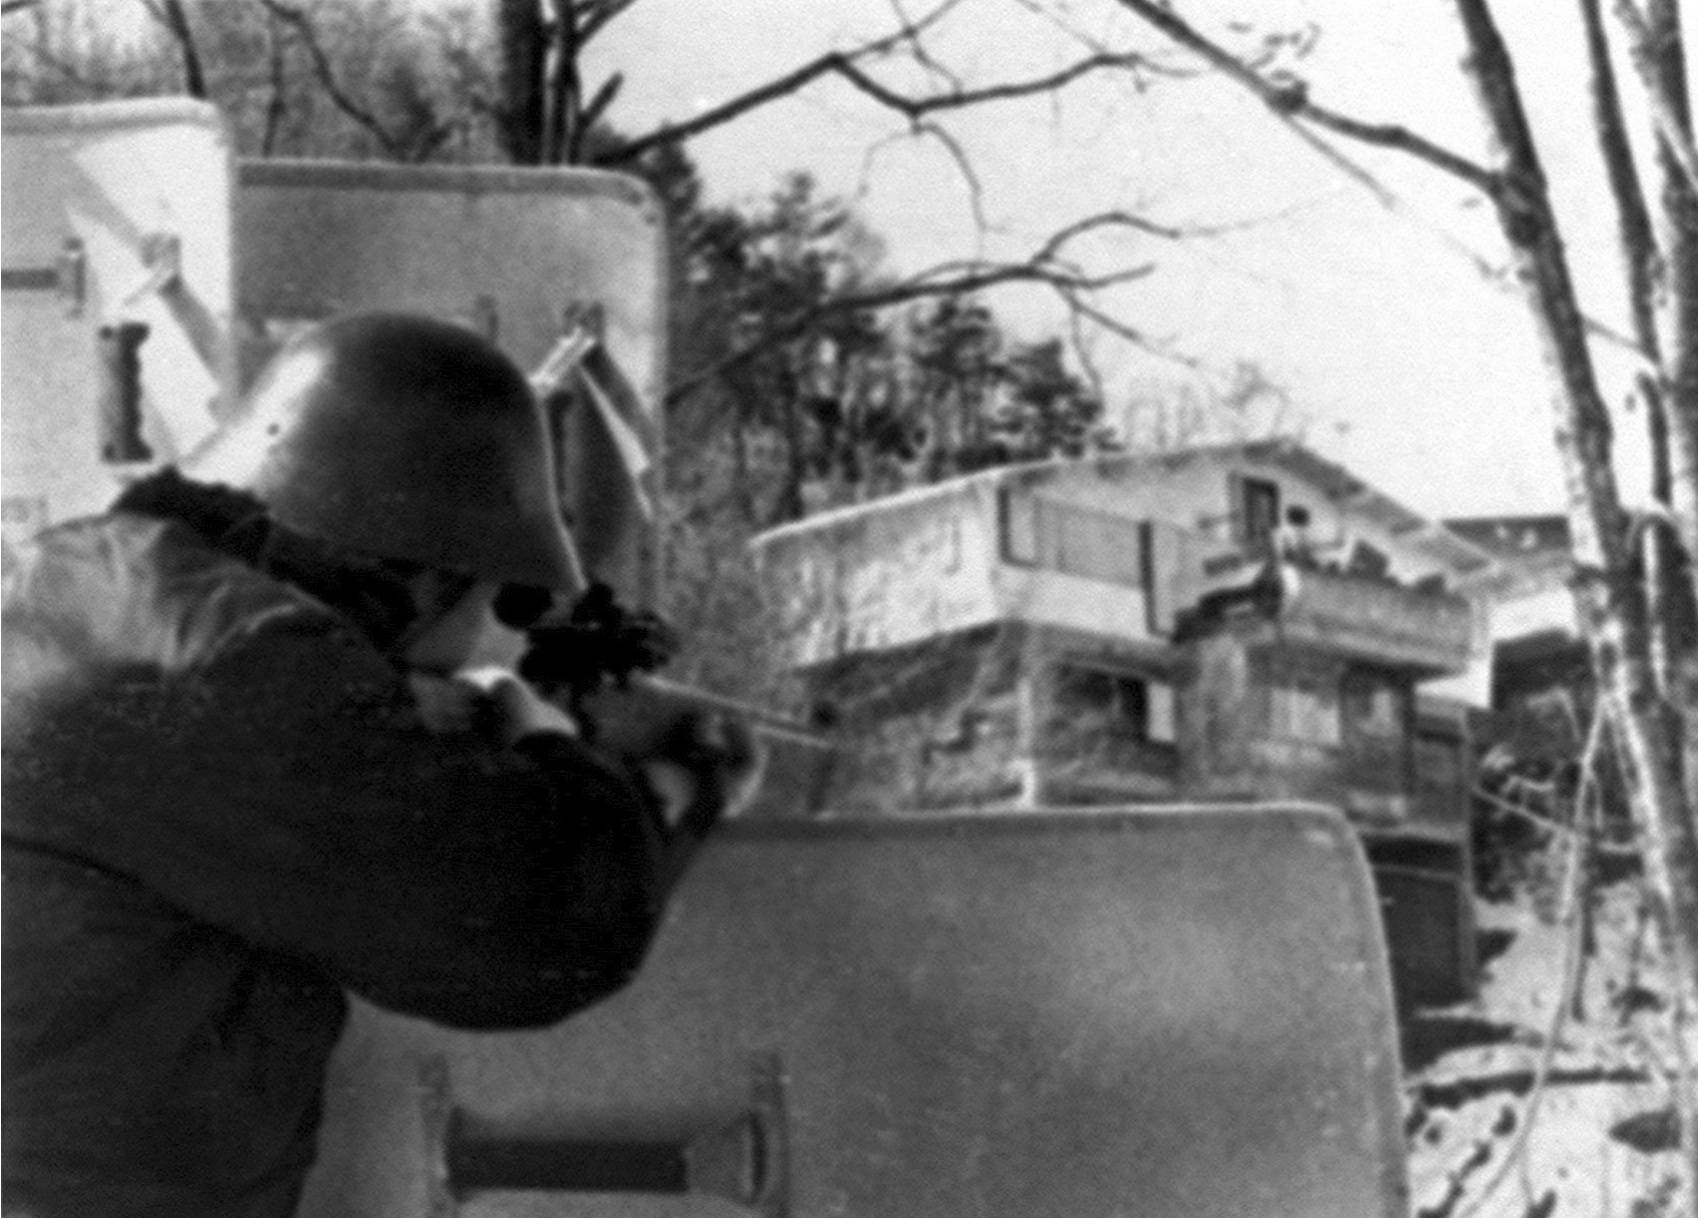 A police sniper aims a rifle at Asama-Sanso lodge in February 1972 in the town of Karuizawa, Nagano Prefecture. | KYODO